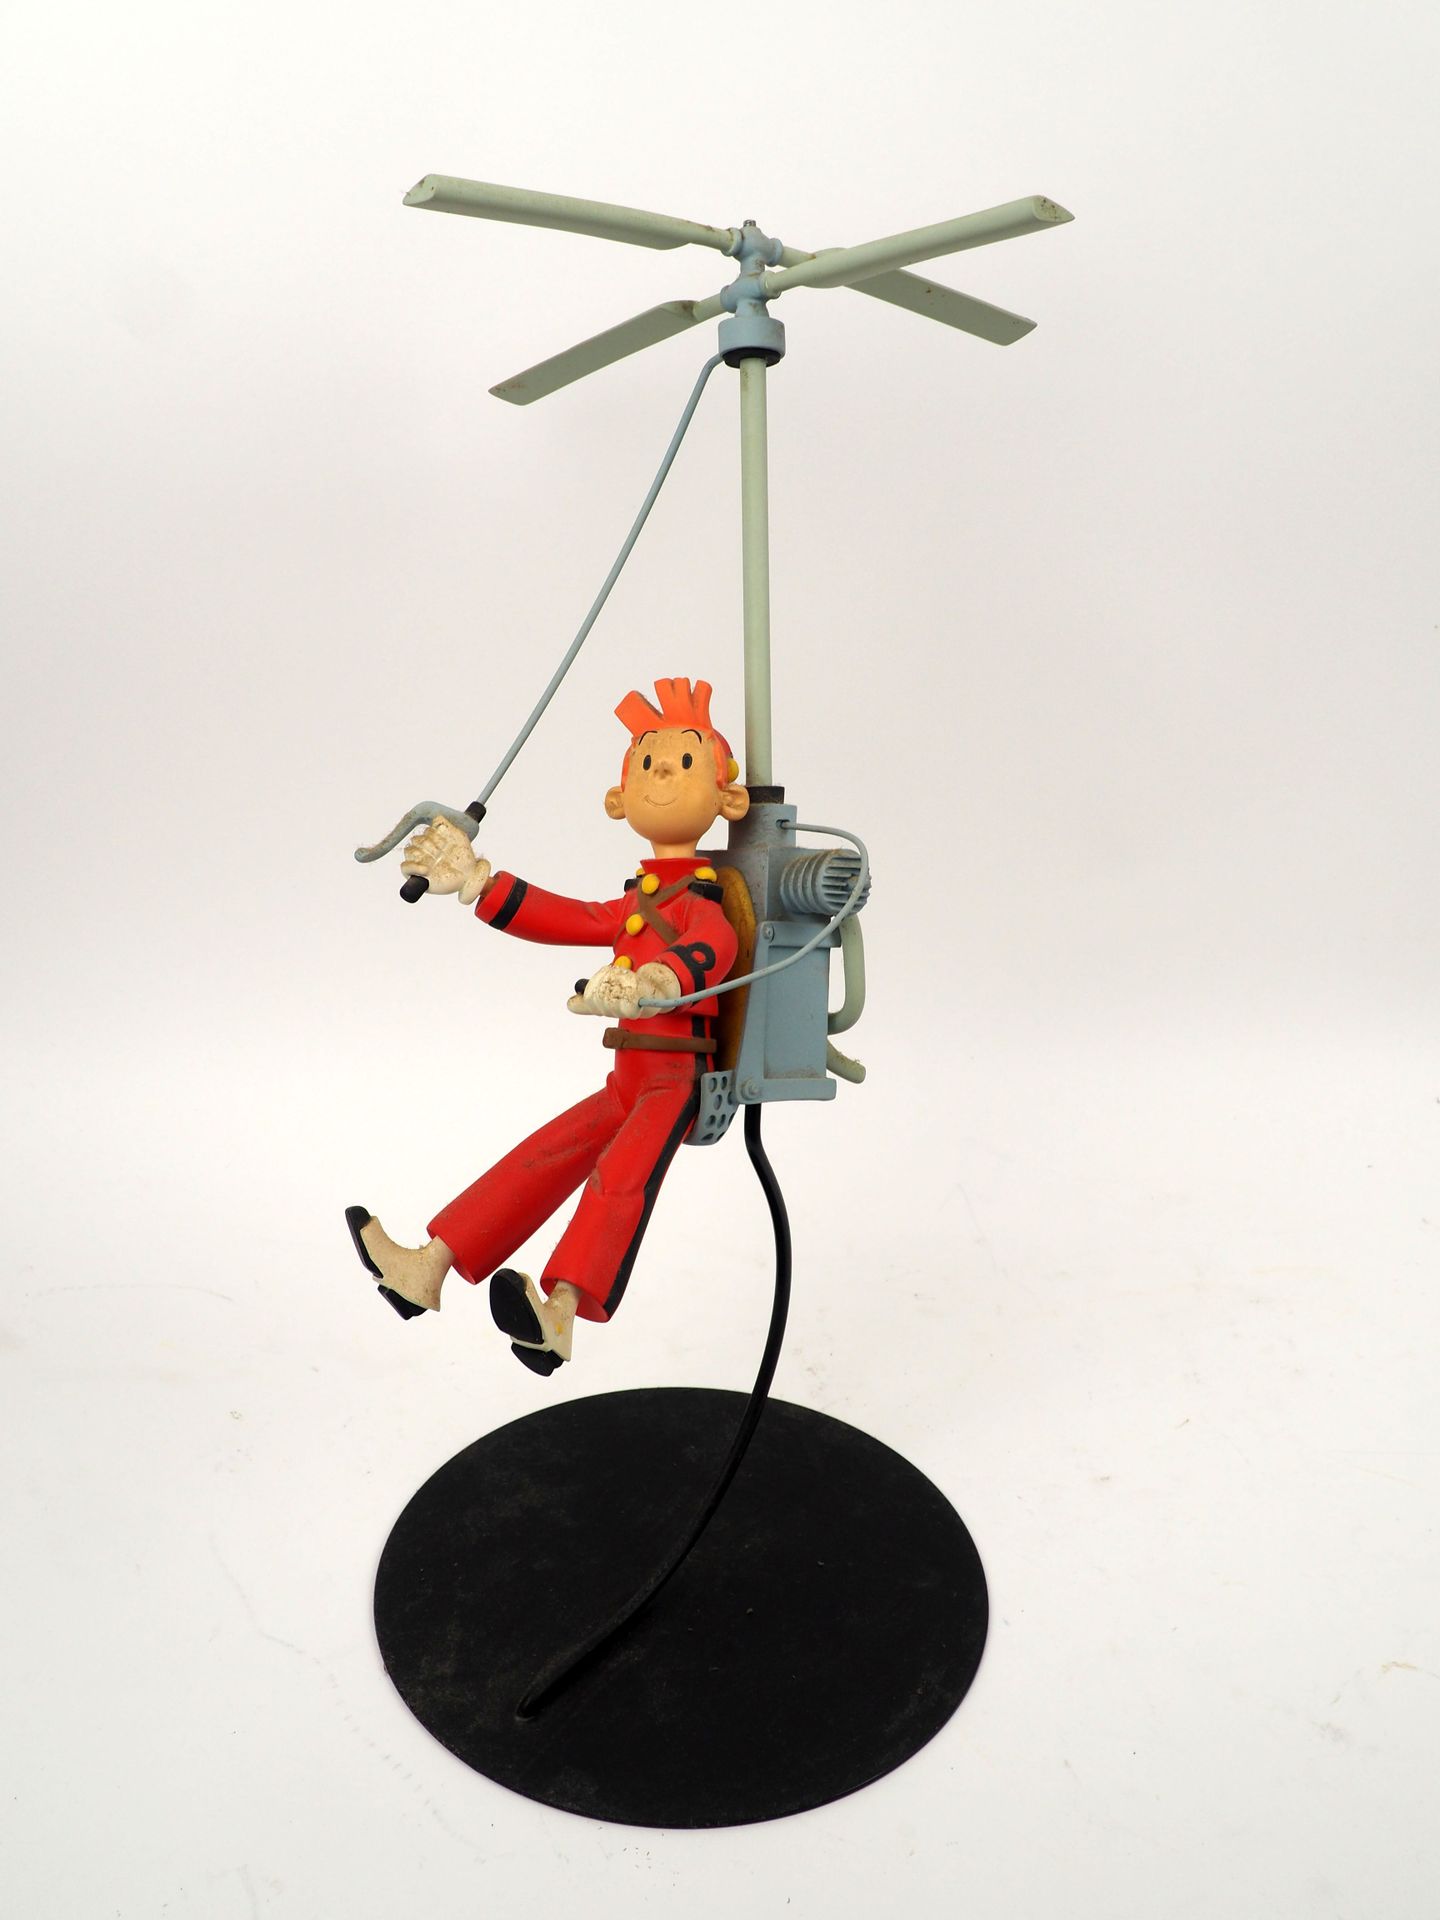 Null FRANQUIN
Spirou and Fantasio
The fantacopter
Figurine published by Leblon D&hellip;